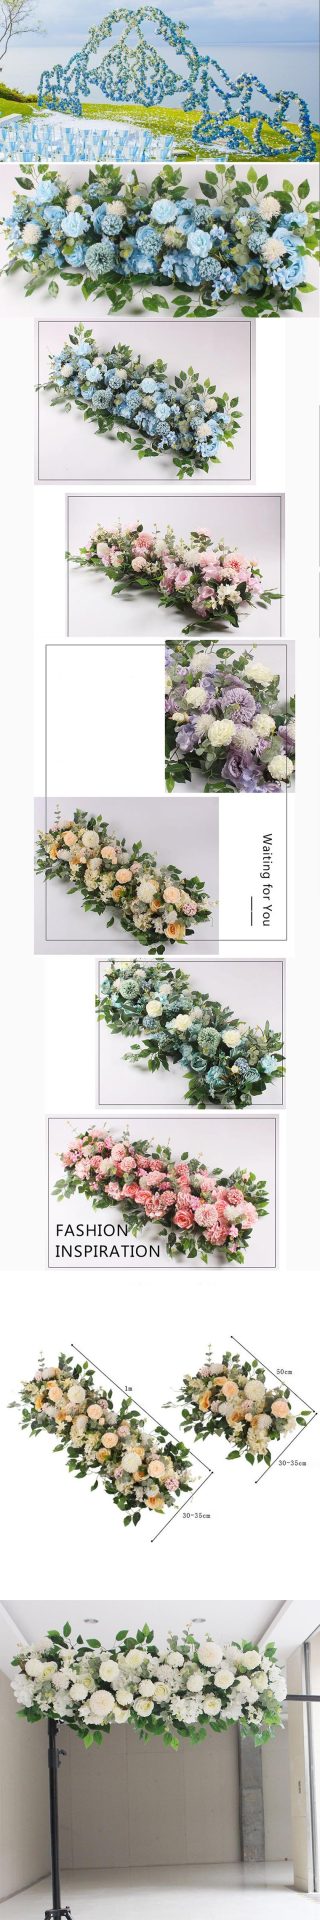 artificial flower rows